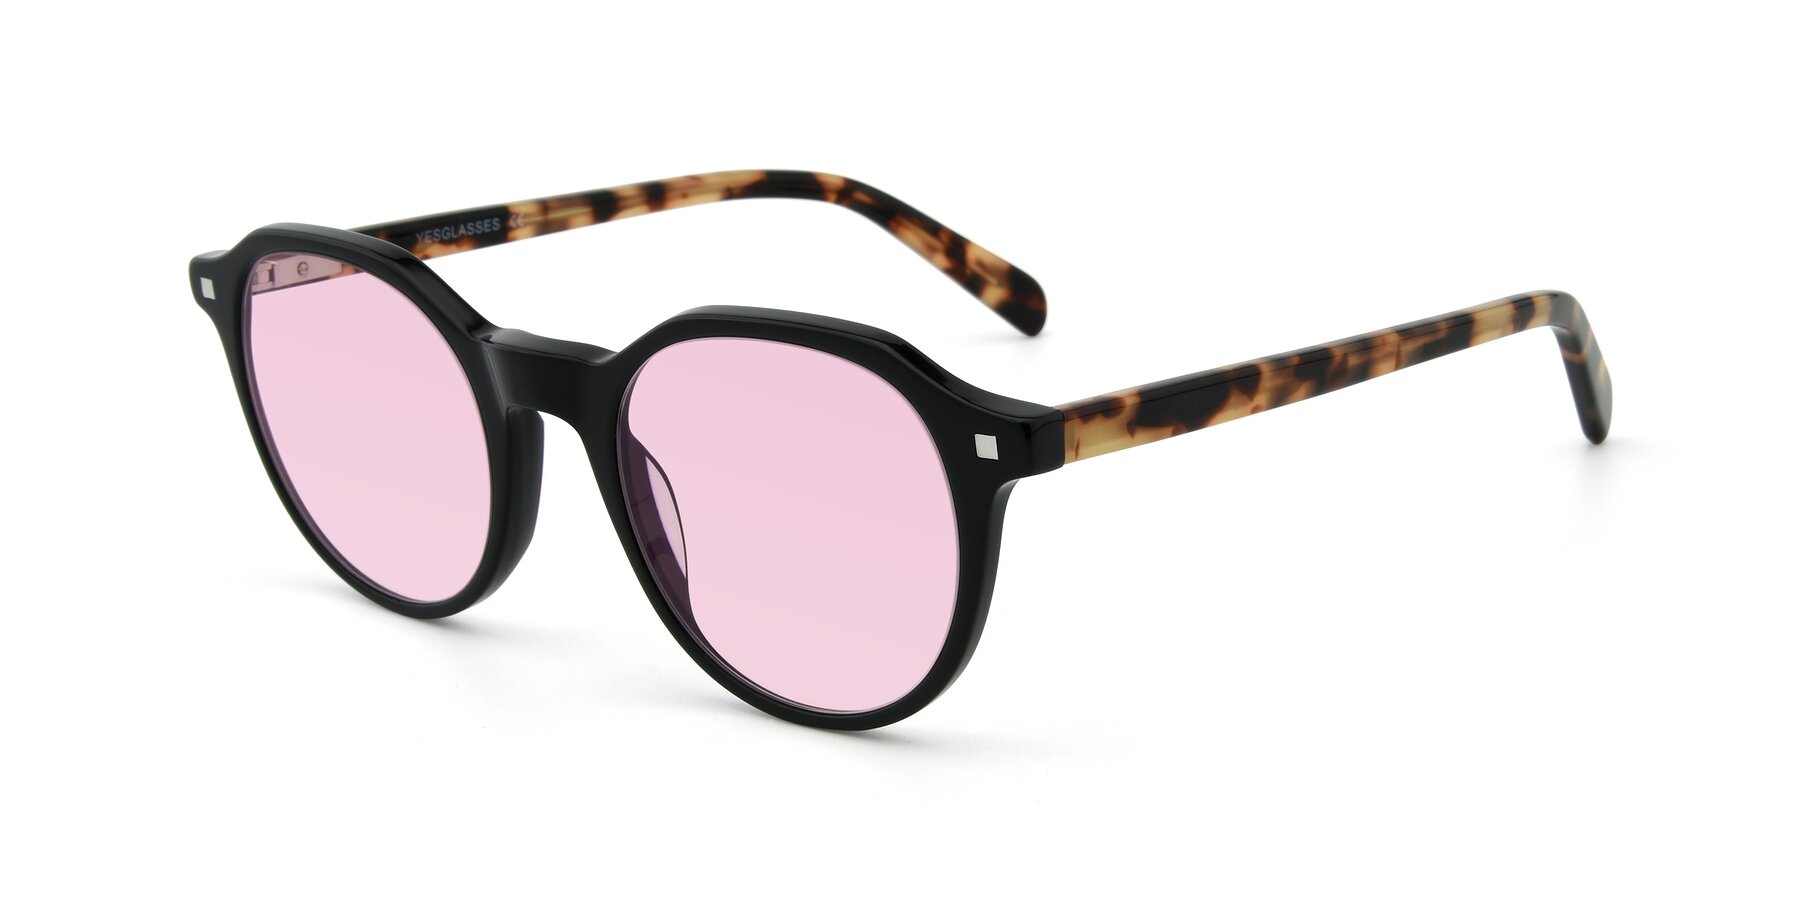 Angle of 17425 in Black with Light Pink Tinted Lenses